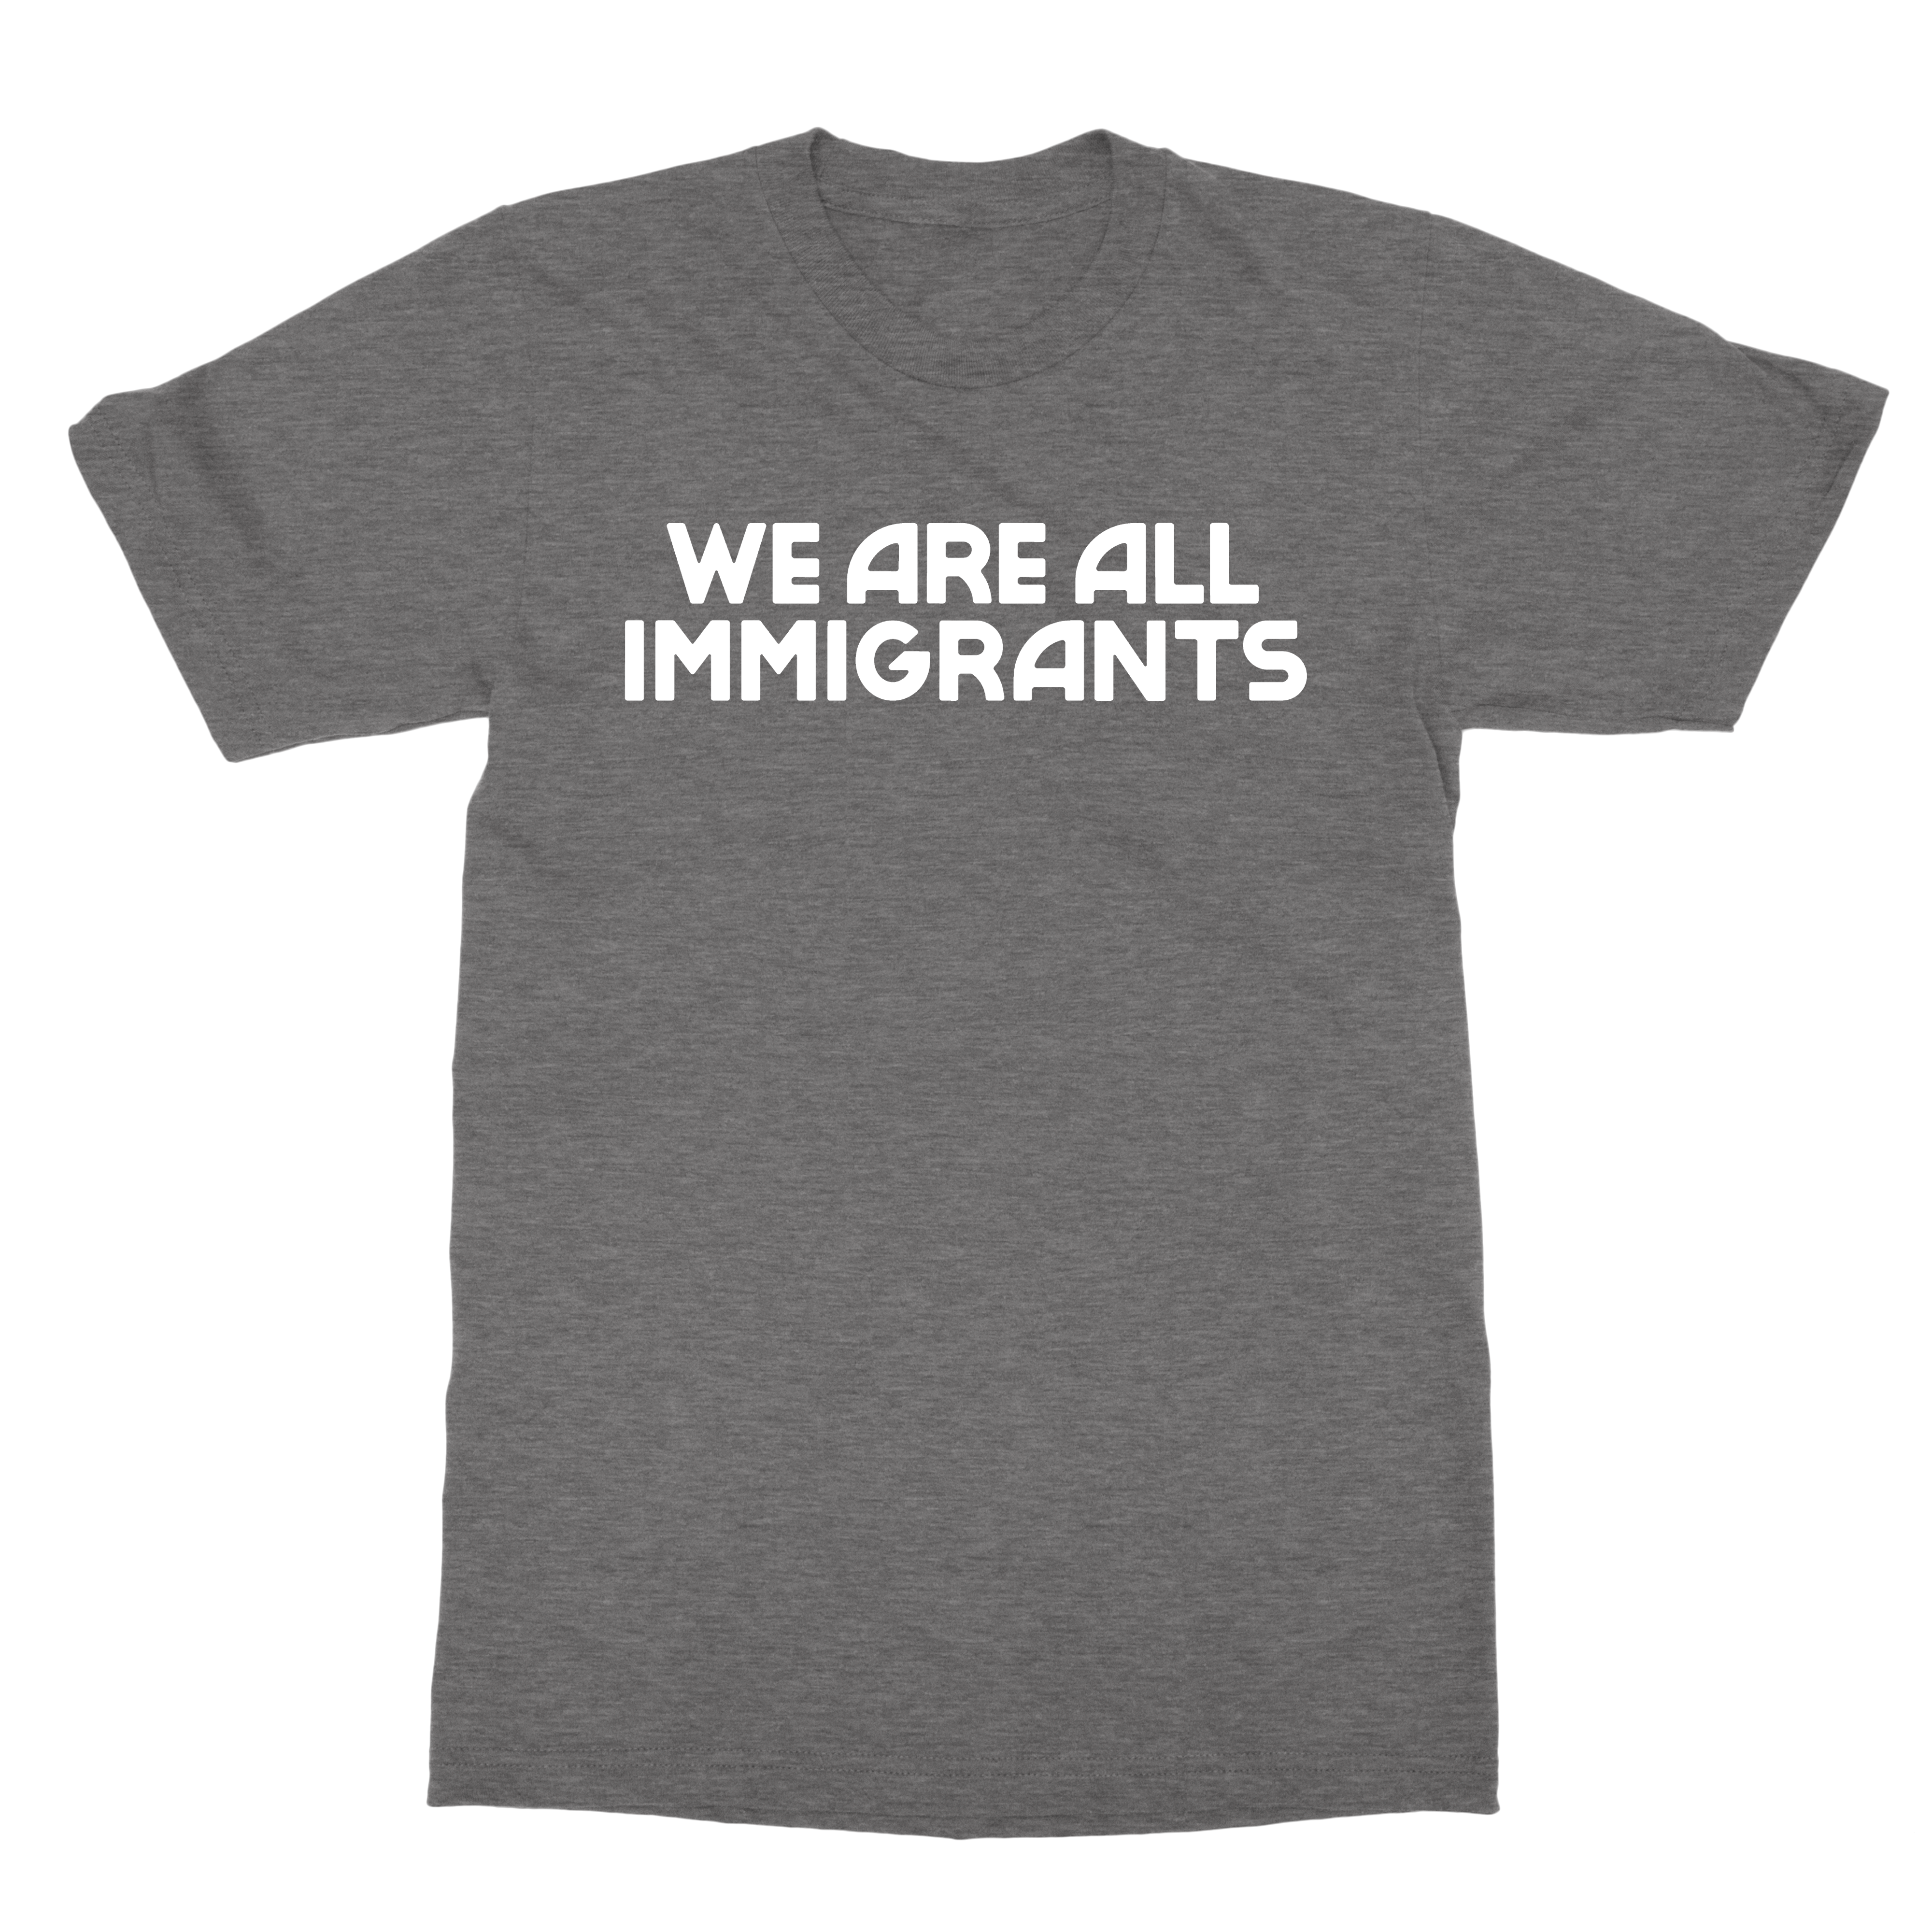 Making Movies | We Are All Immigrants T-Shirt - Dark Grey